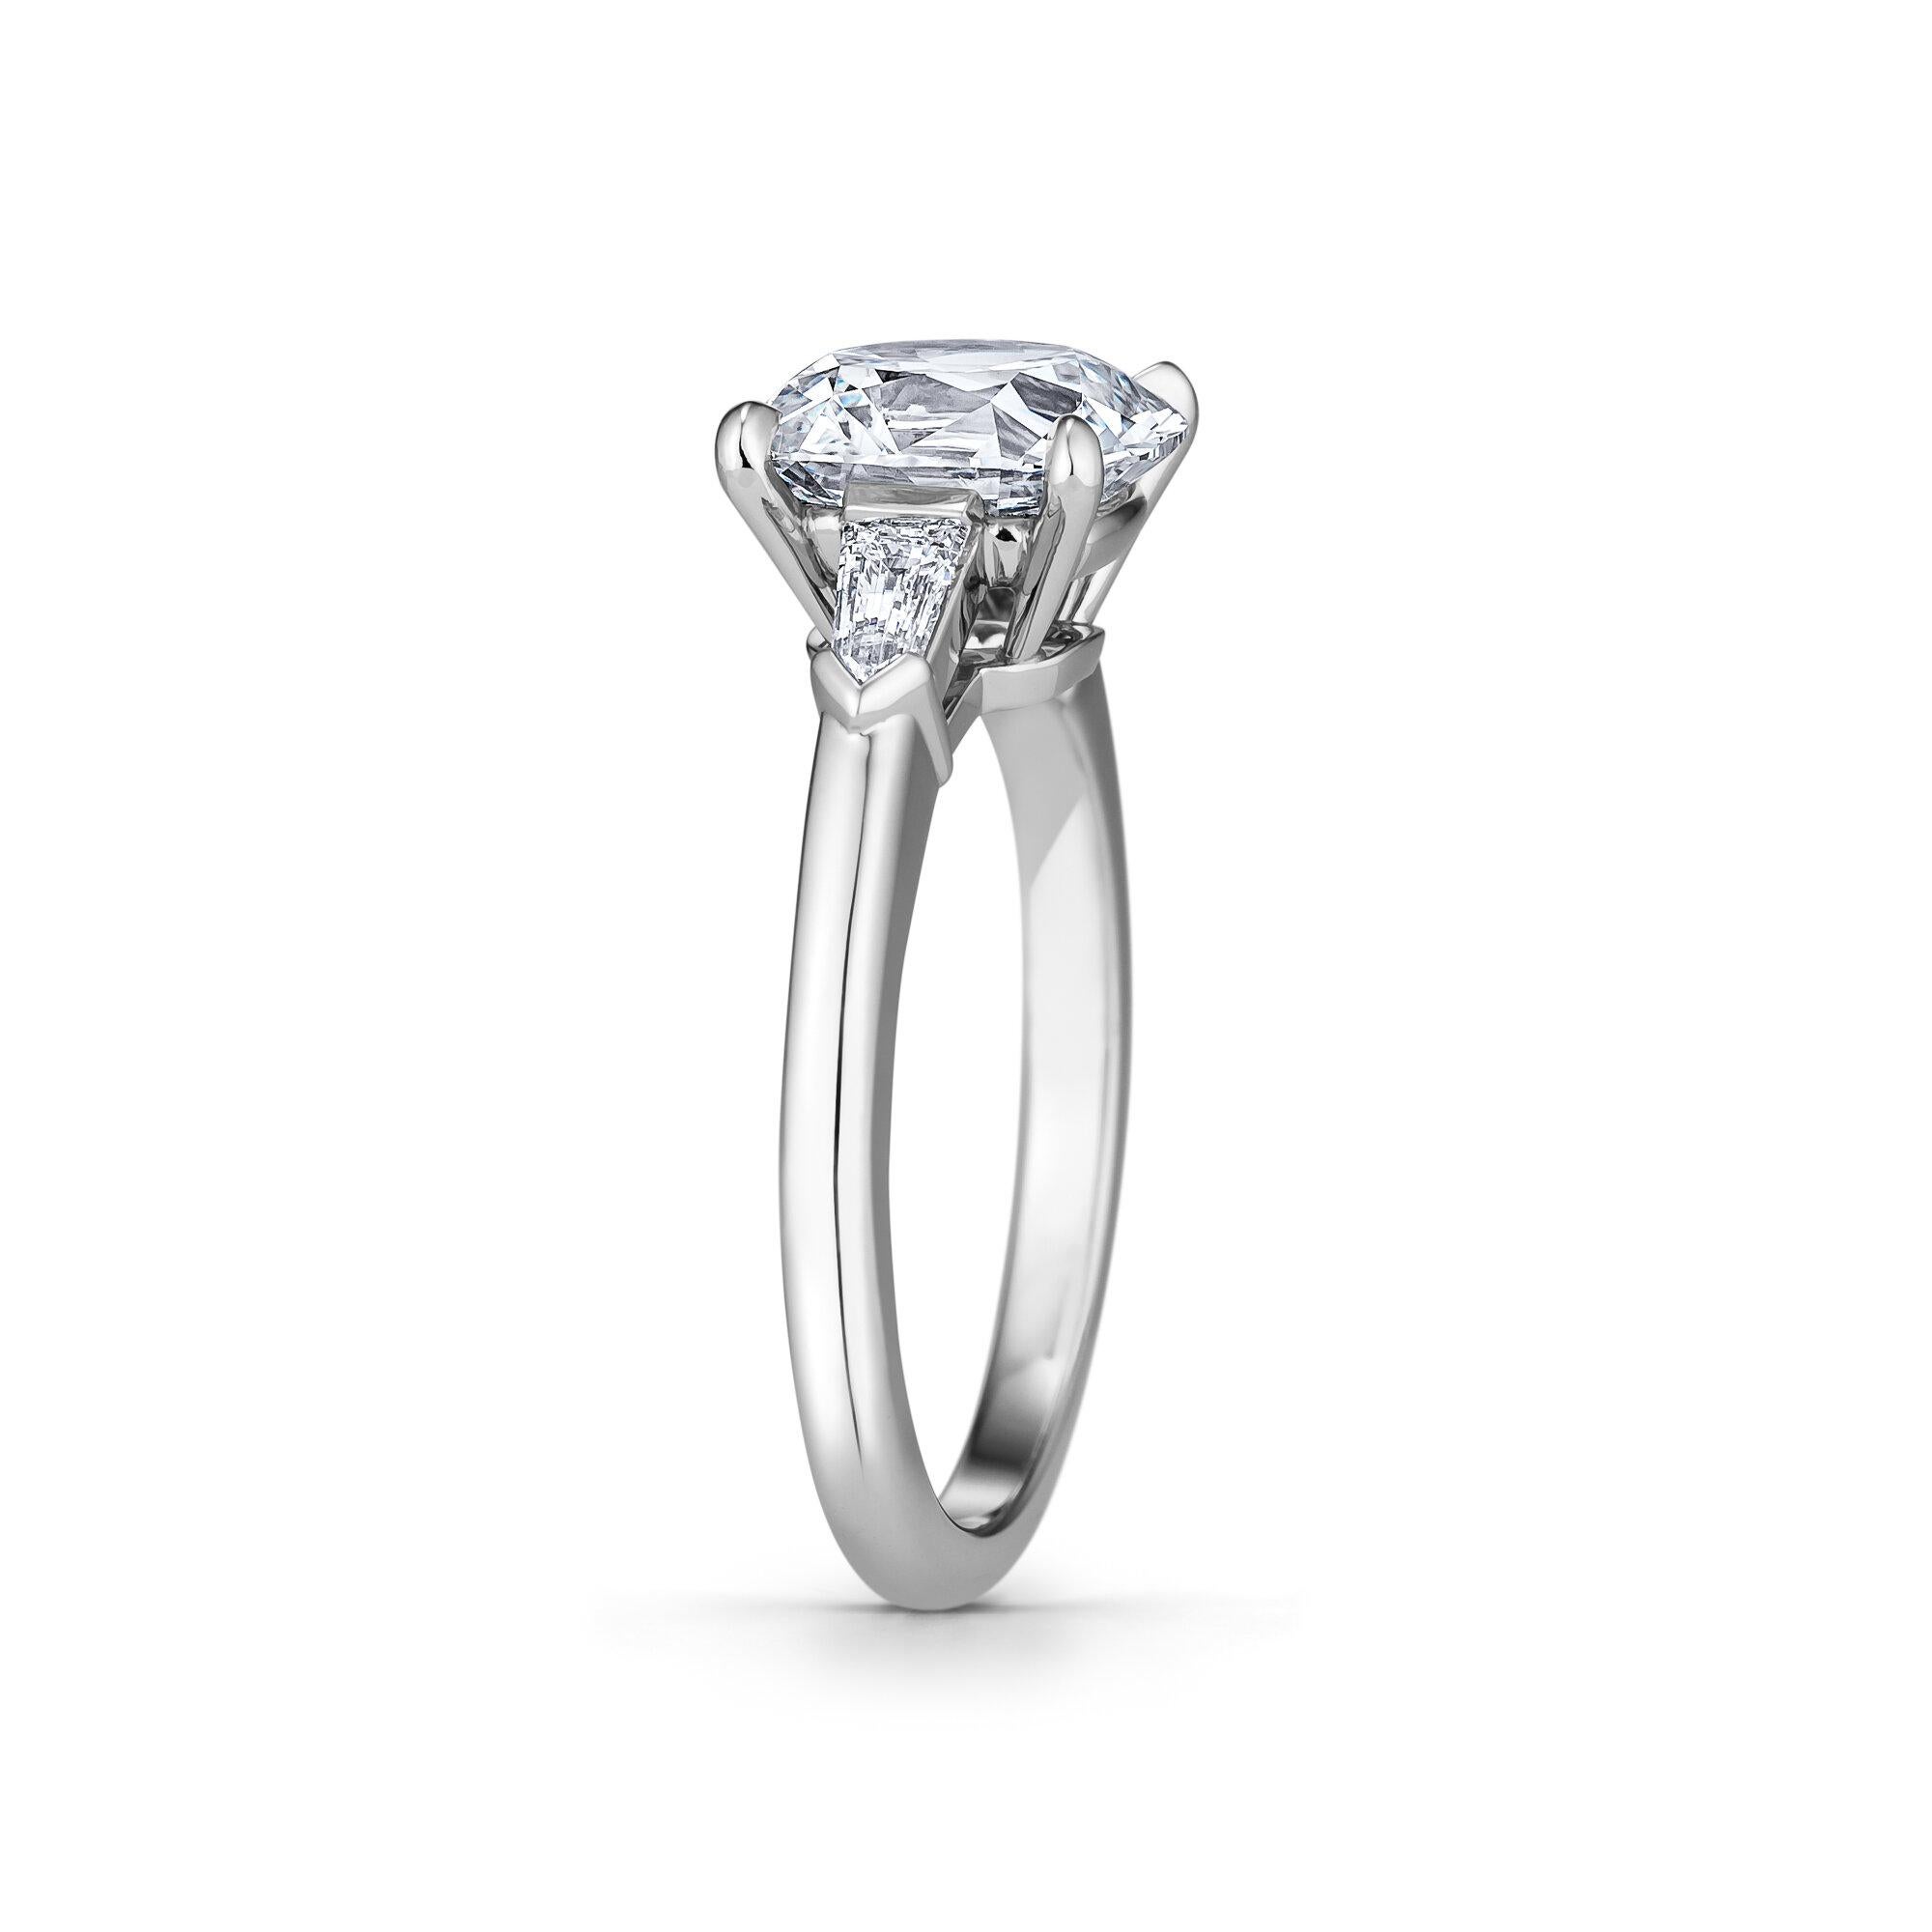 Be Brilliant with this 2.27 cushion cut diamond platinum handmade engagement ring.  GIA certification #5191823591.  F color.  VS2 clarity.  Side diamond bullets with a total weight of .21 carats.  D-E color.  VS1 clarity.  Size 6.  Designed by